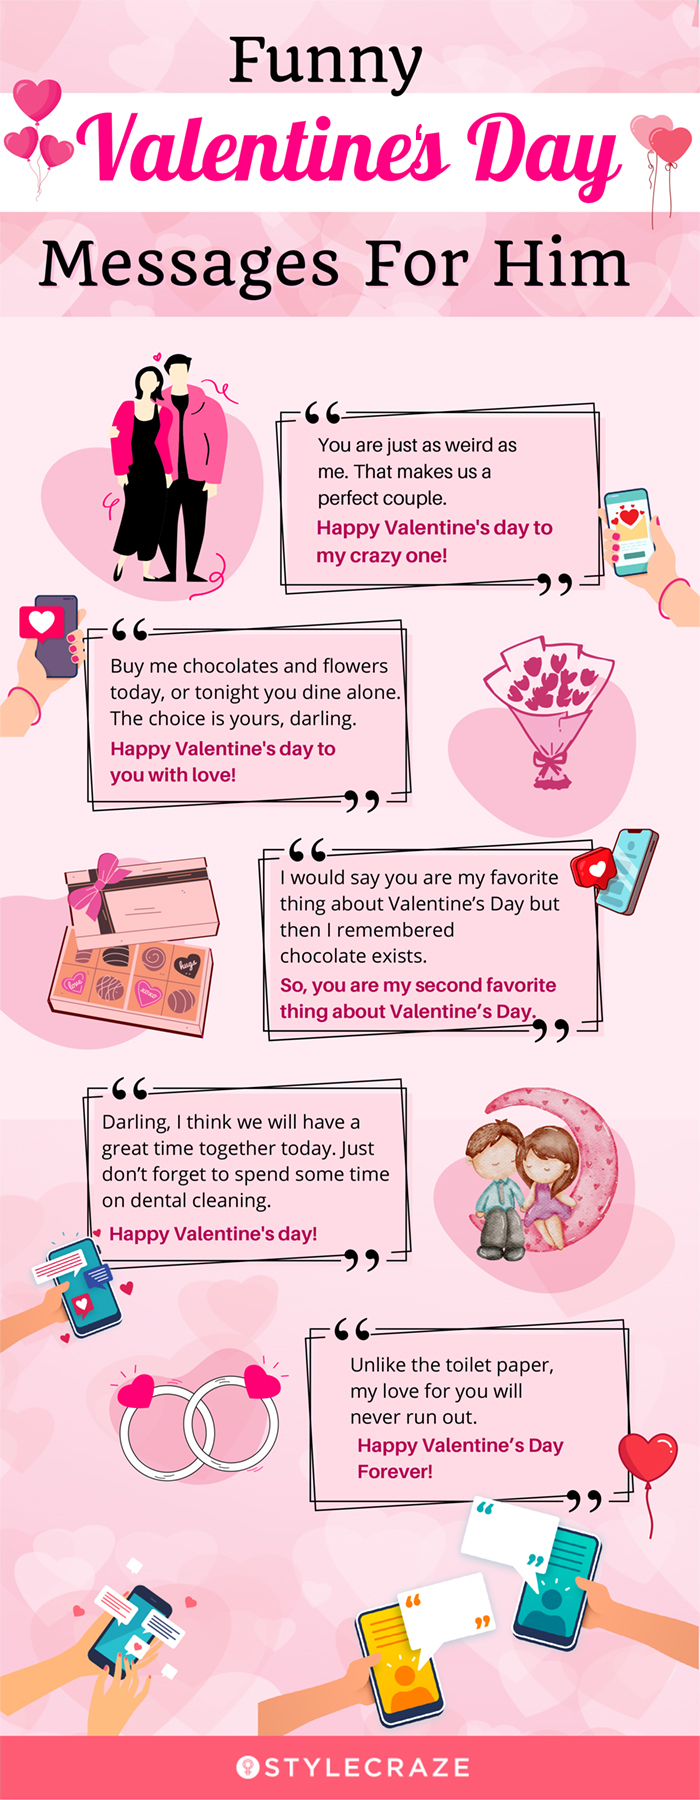 funny valentines day messages for him [infographic]